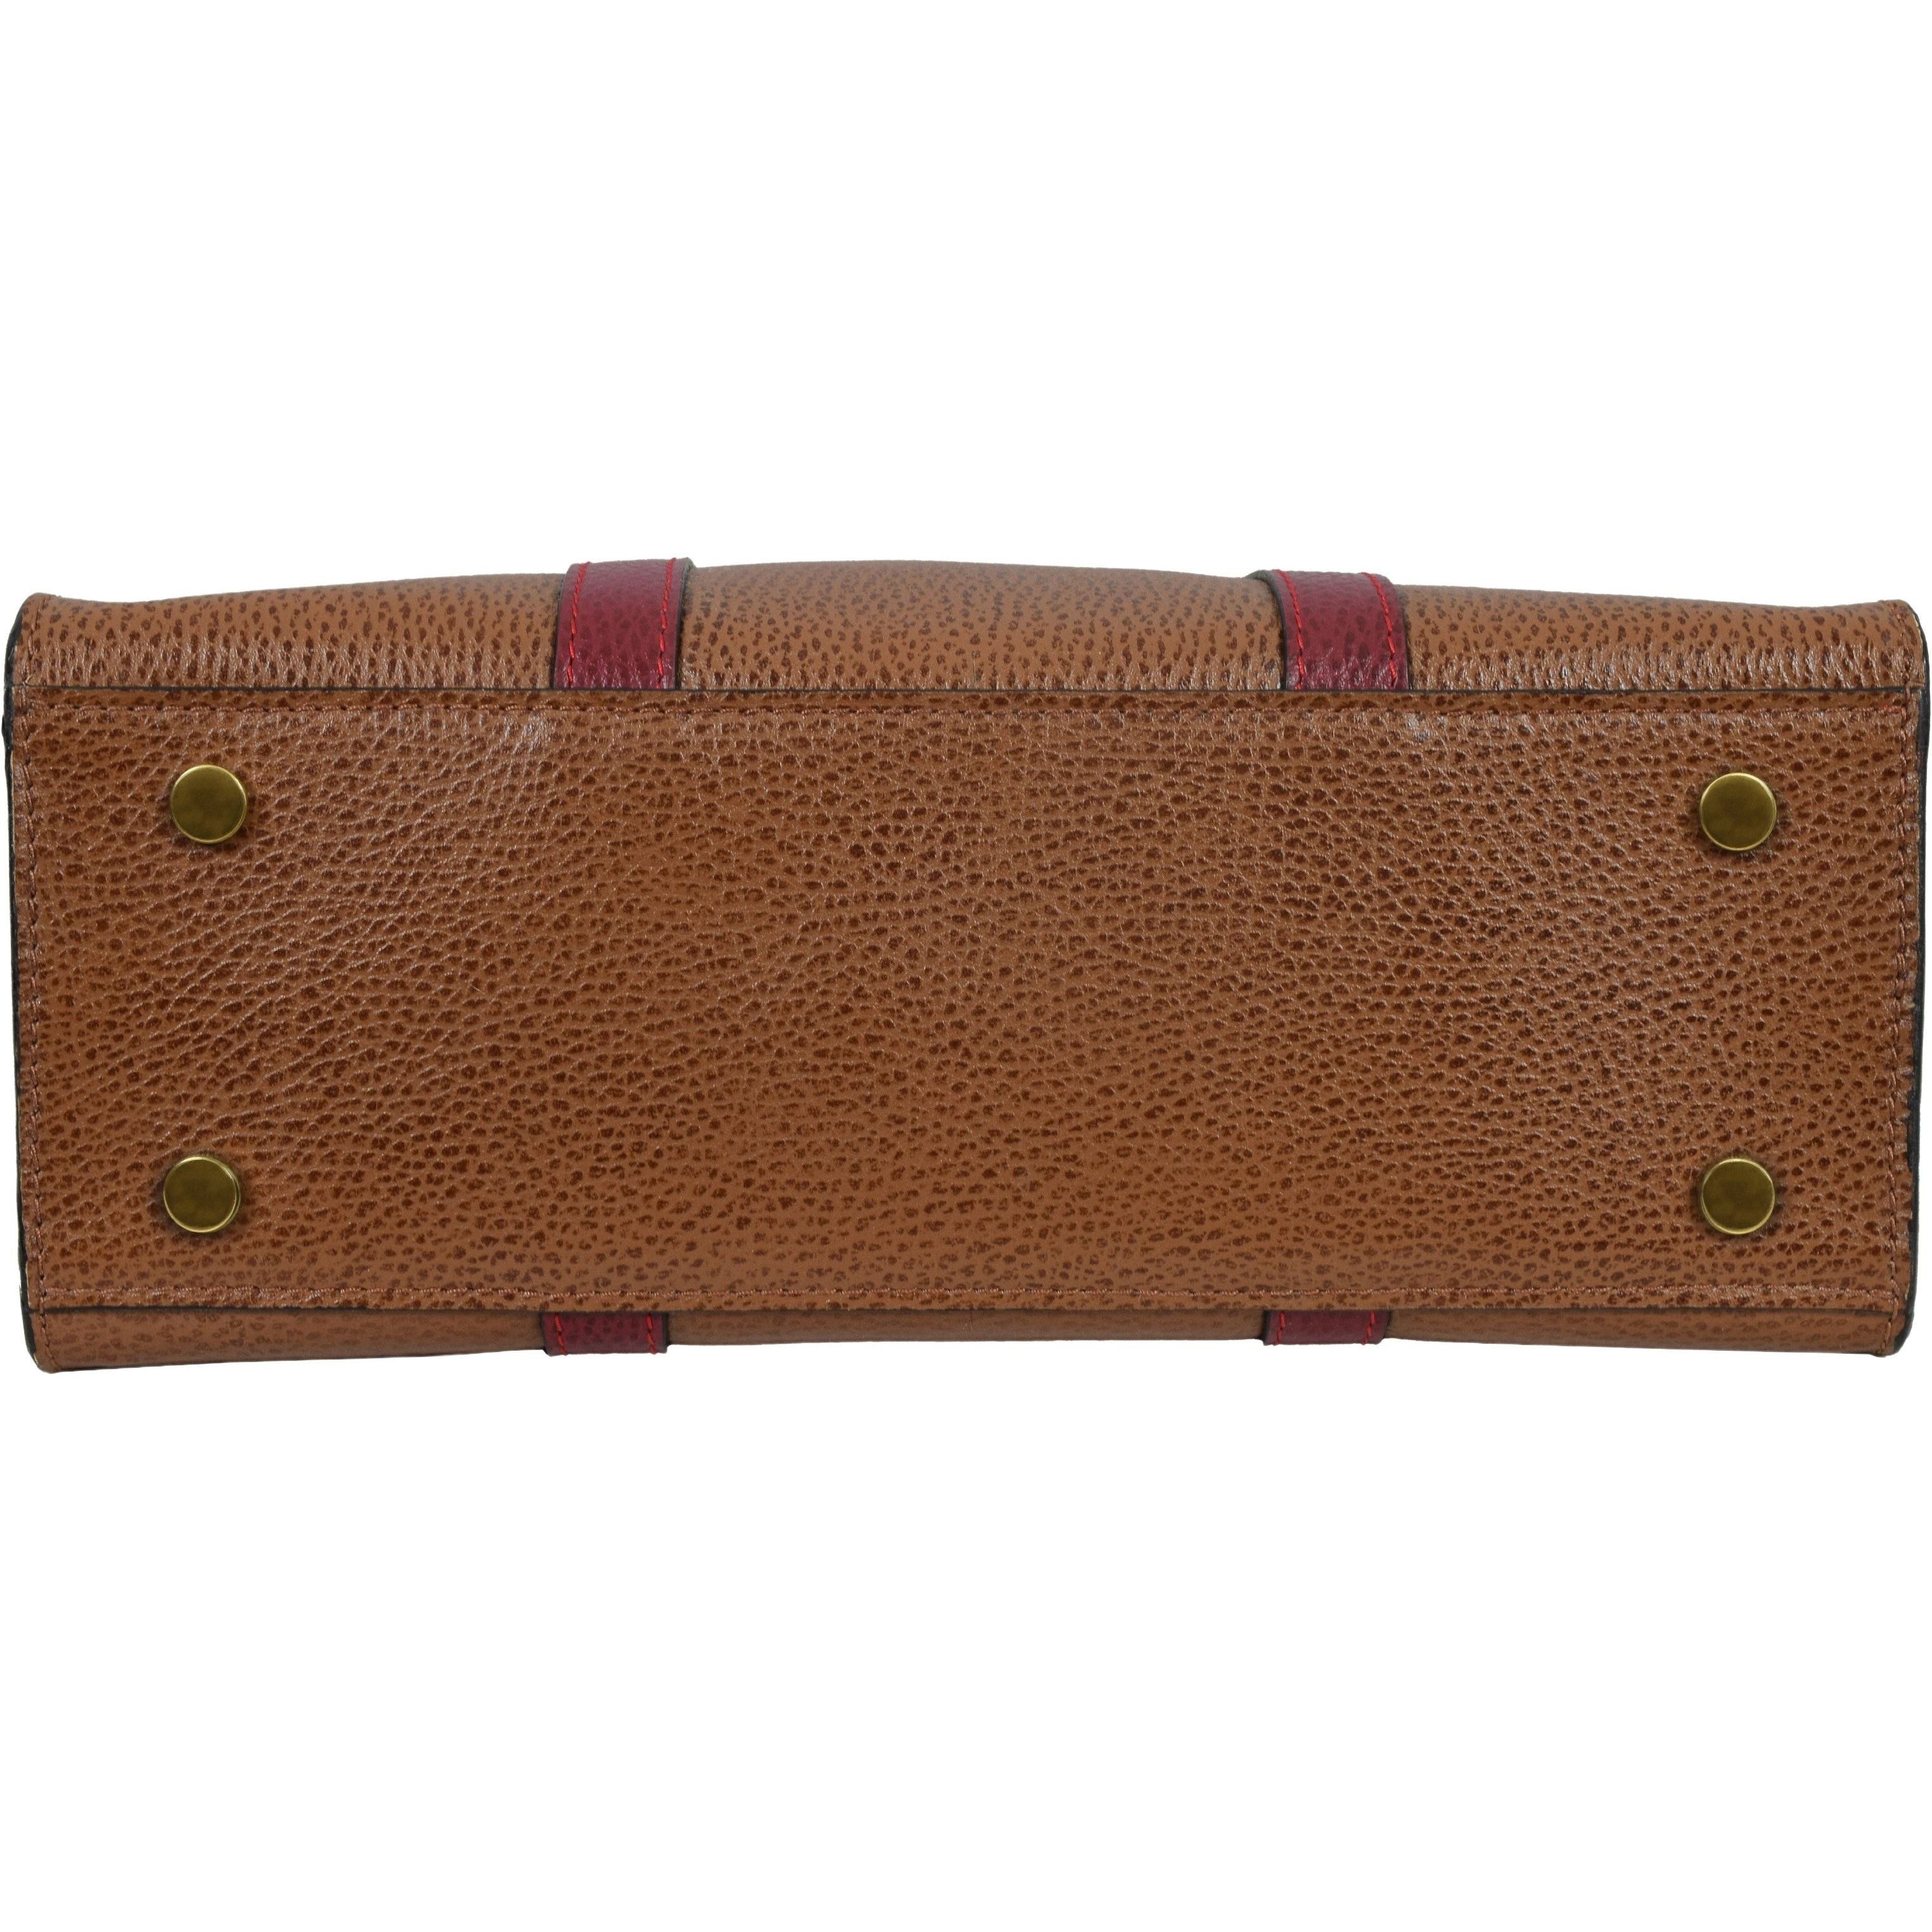 Premium Colombian Handmade Leather Goods Guaranteed For Life